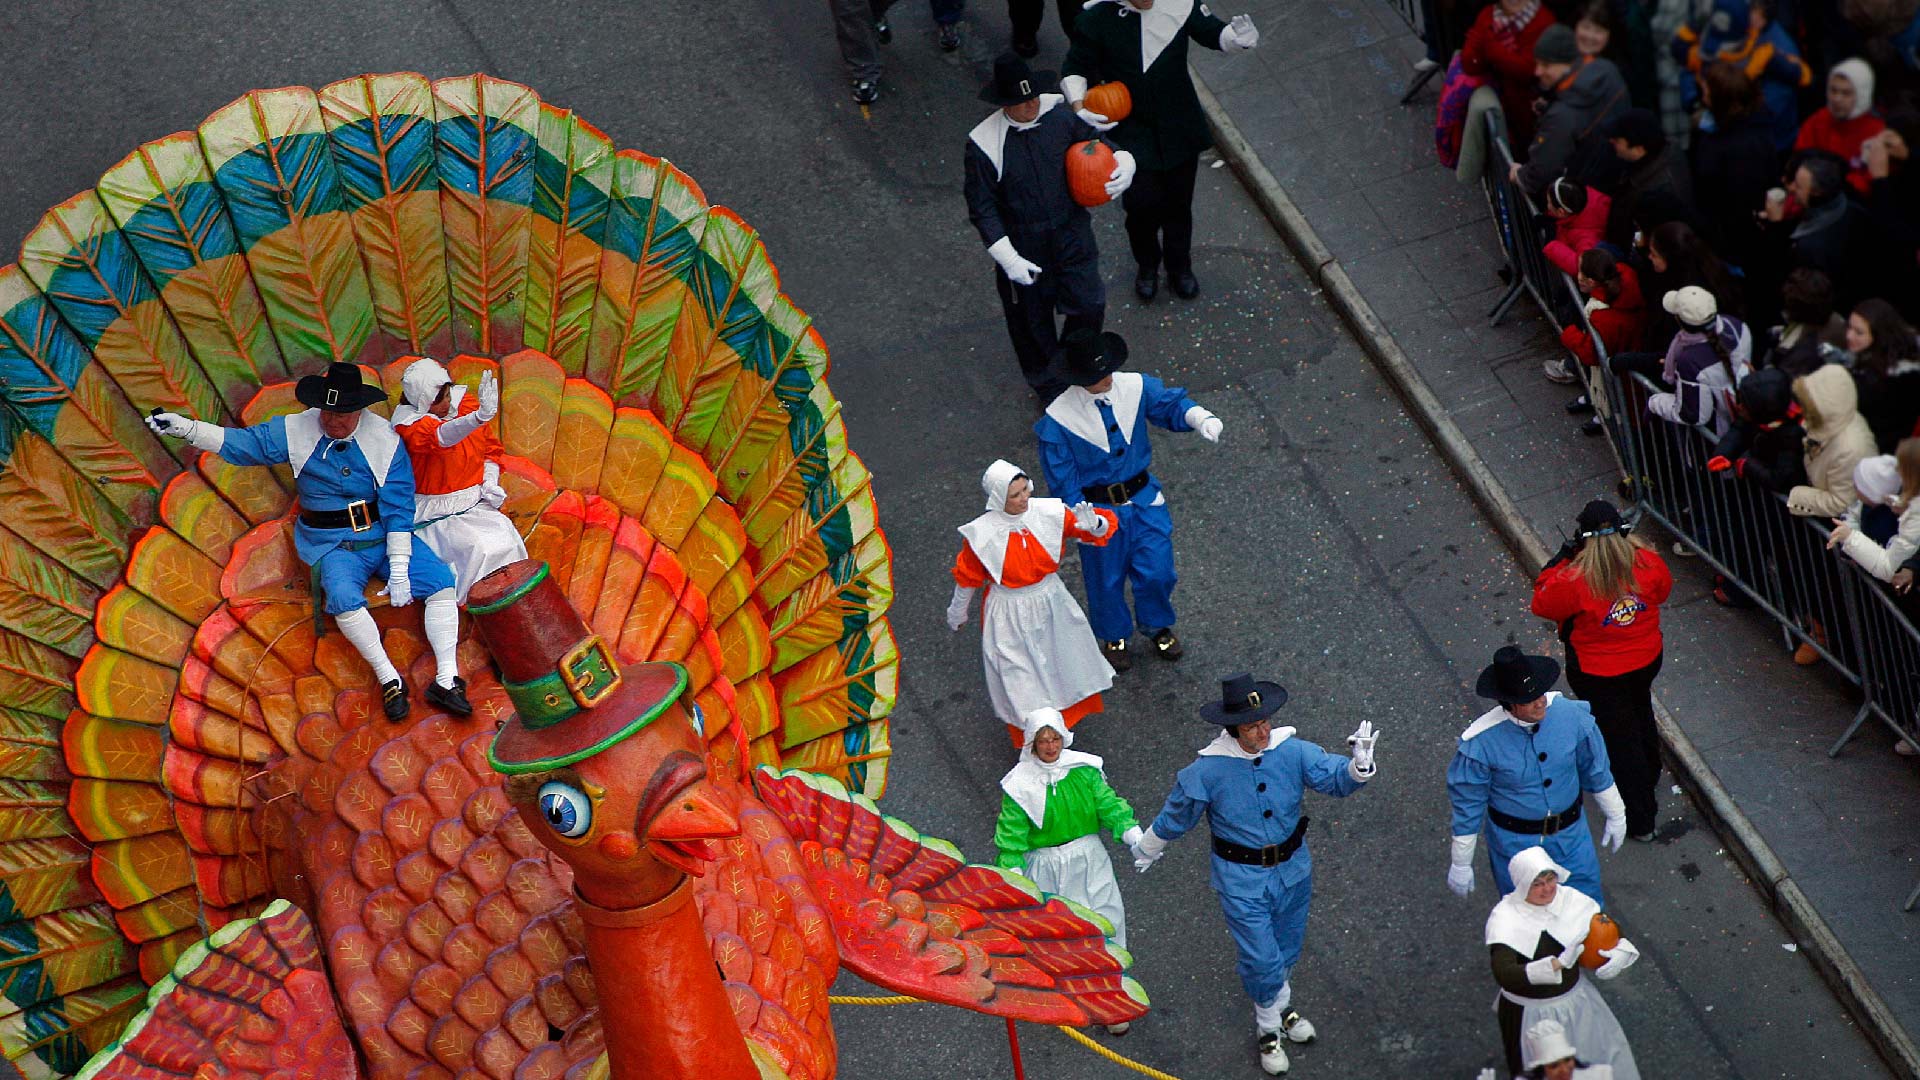 Tom Turkey, the oldest float in the Macys Thanksgiving Day Parade